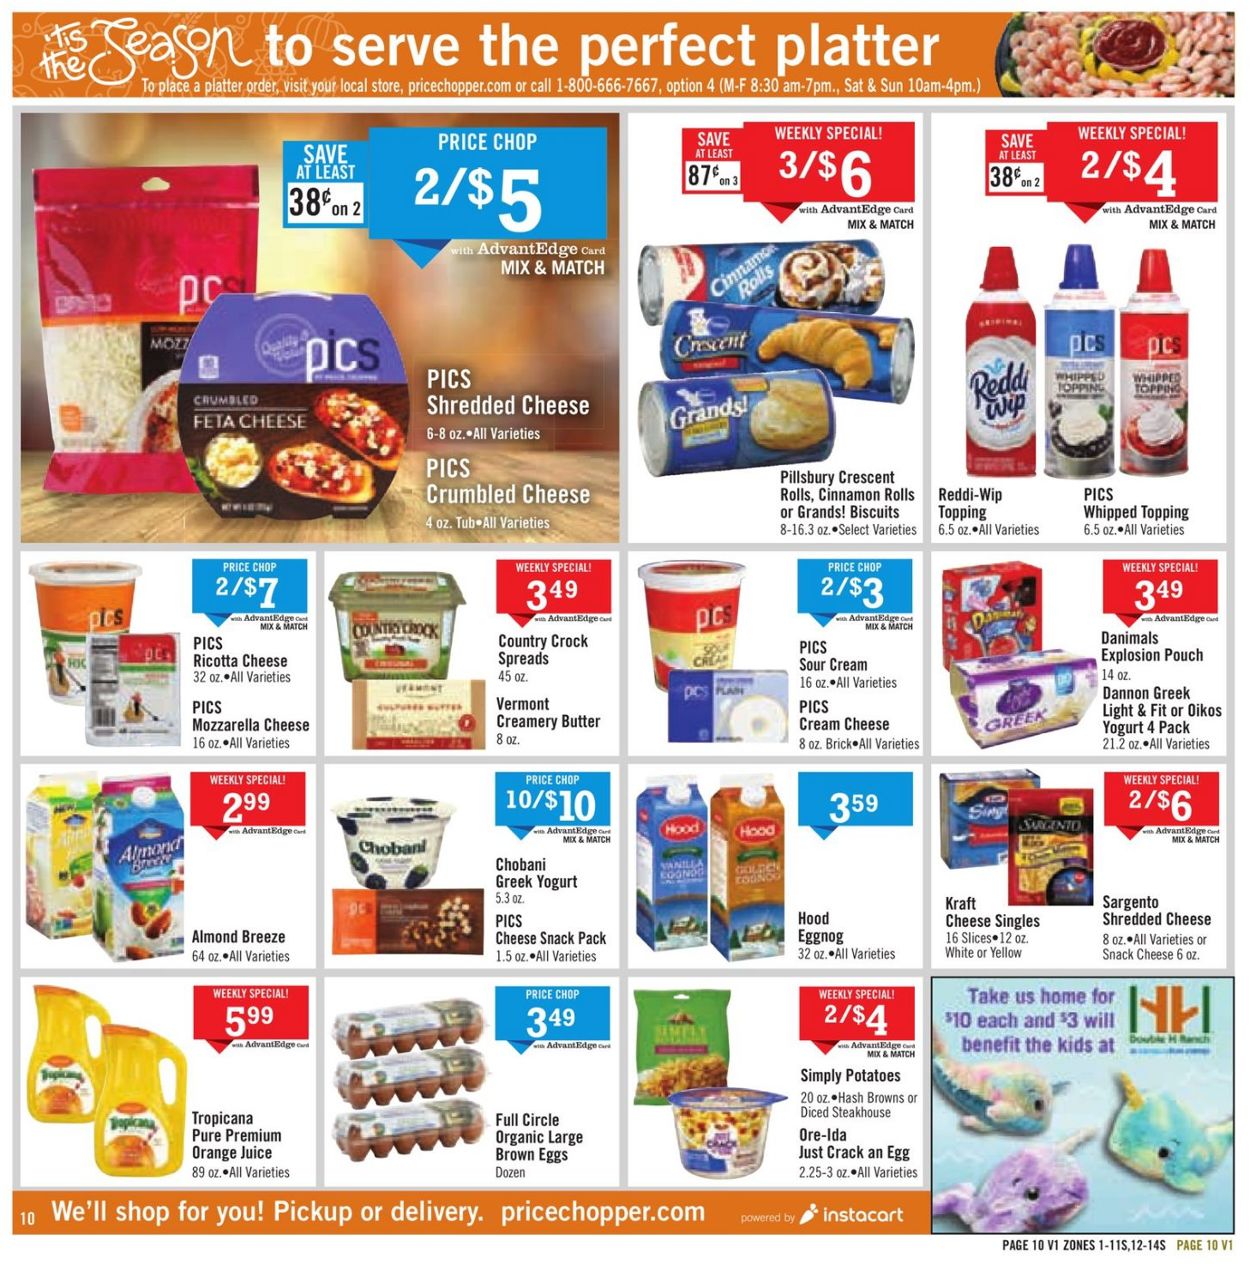 price-chopper-current-weekly-ad-11-15-11-21-2020-14-frequent-ads